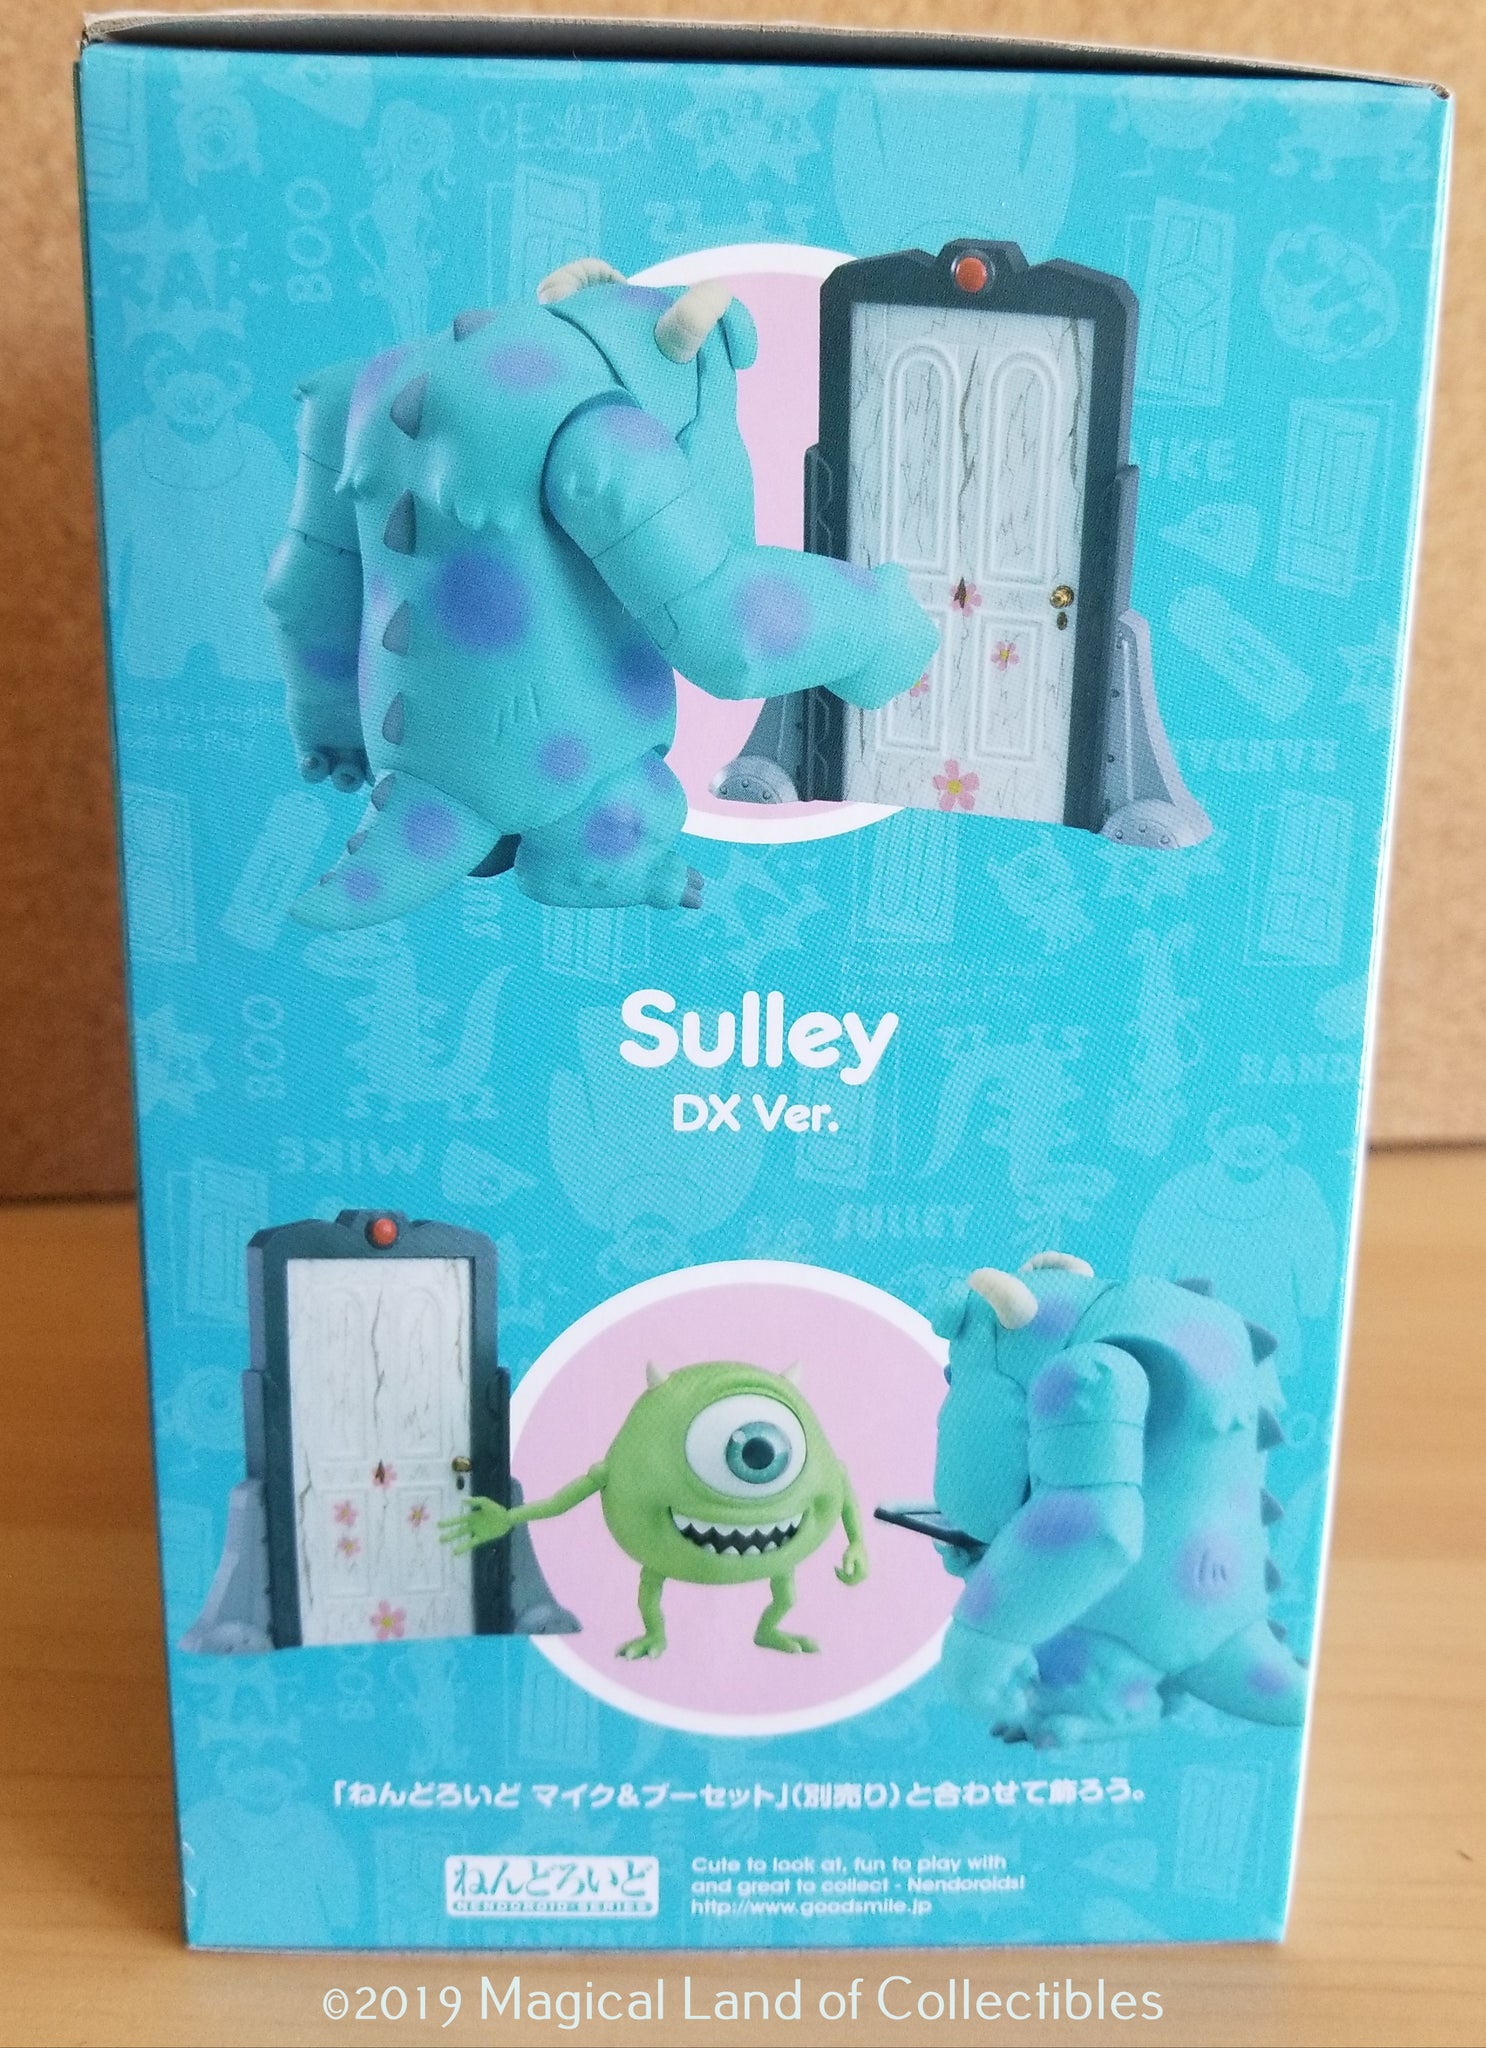 Nendoroid Sulley DX Ver Monsters, Inc